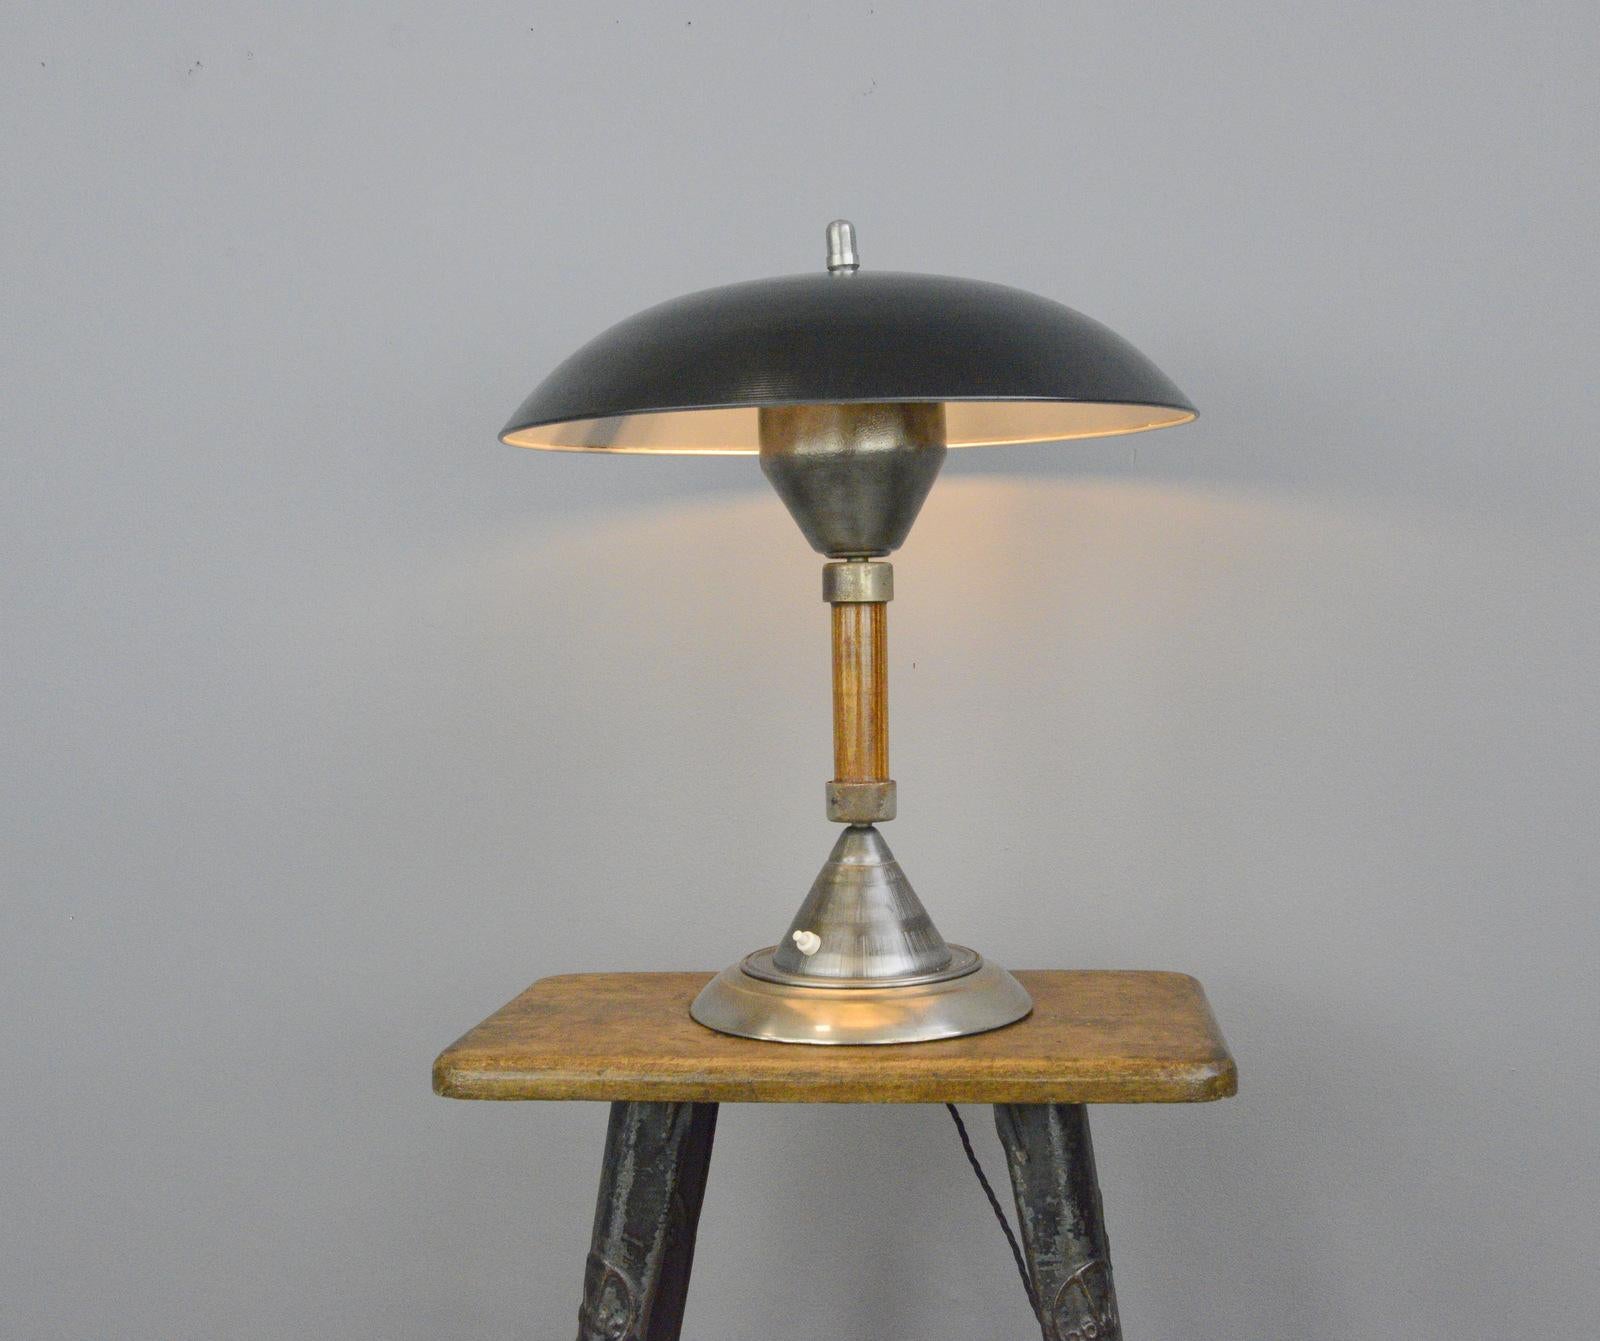 German Panzerfaust table lamp by Kaiser, circa 1940s

- Turned steel shade
- On/Off switch on the base
- Takes E27 fitting bulbs
- Made by Kaiser
- German, 1940s
- Measures: 46cm wide x 50cm tall

Panzerfaust lamp

The Panzerfaust lamp